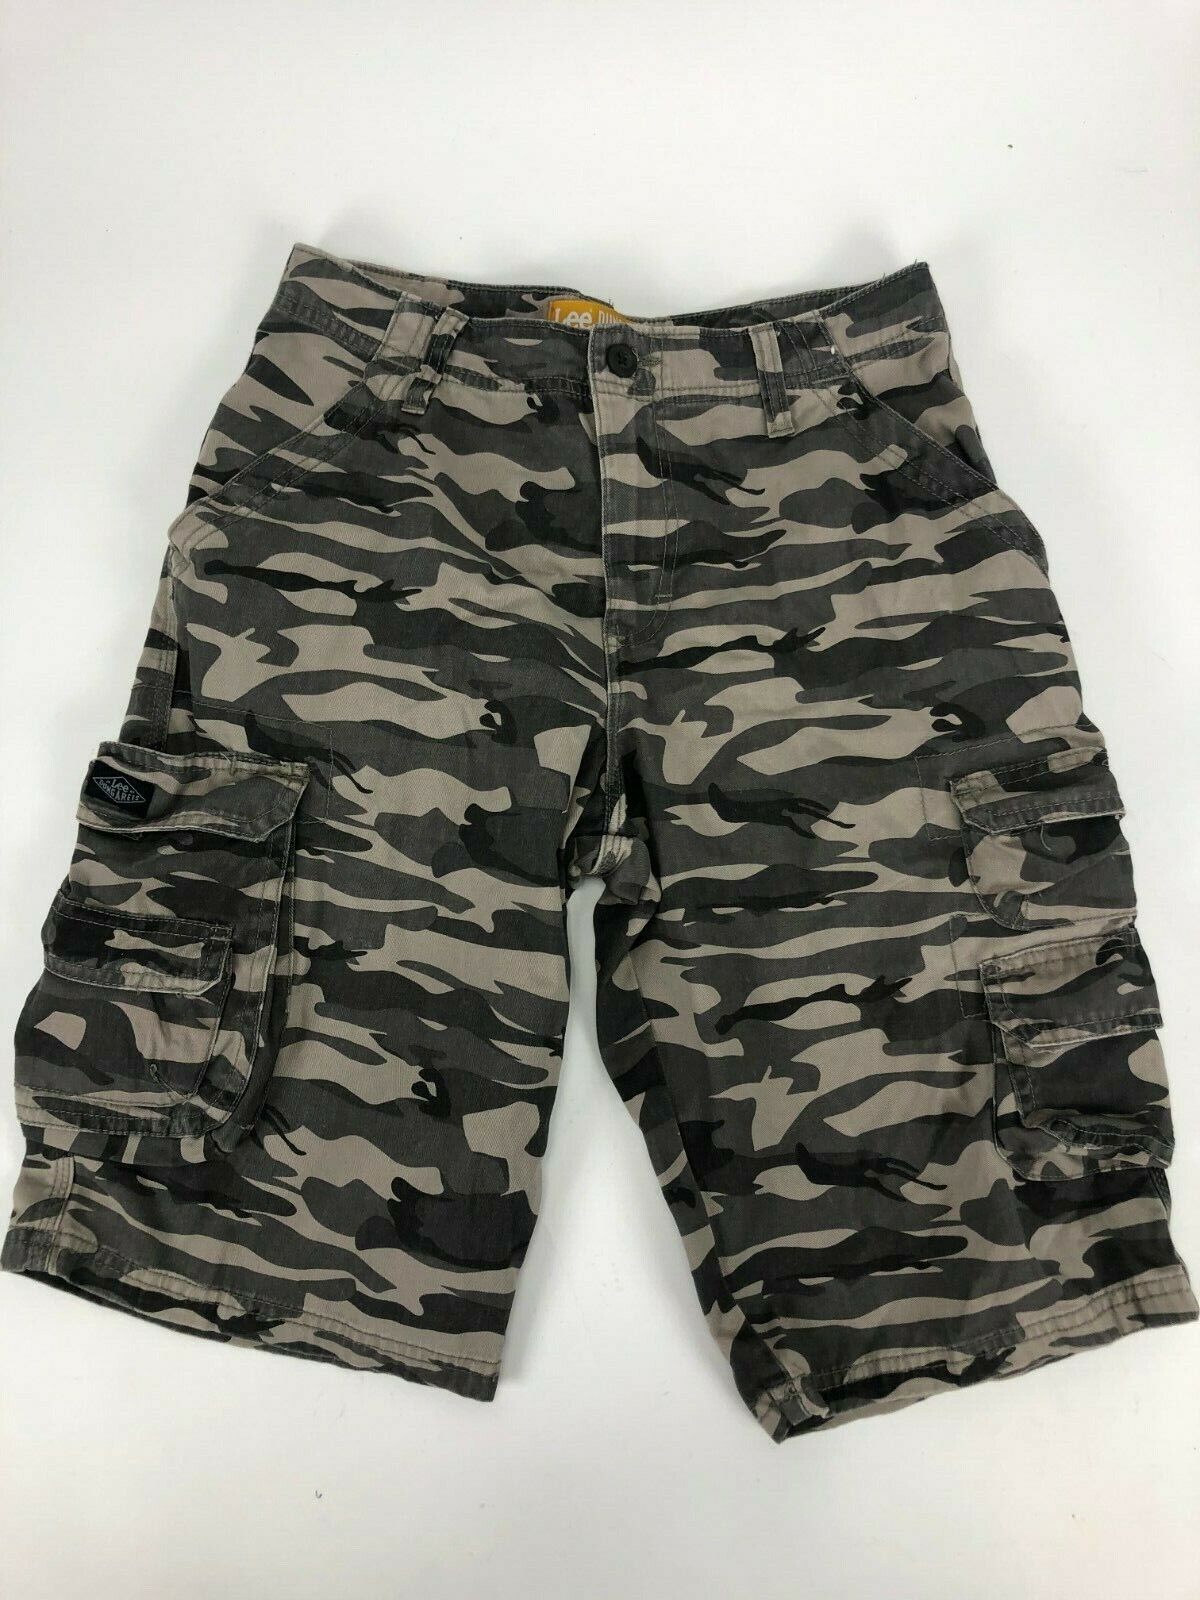 Lee Dungarees Camo Shorts Mens Size 18 R - image 1